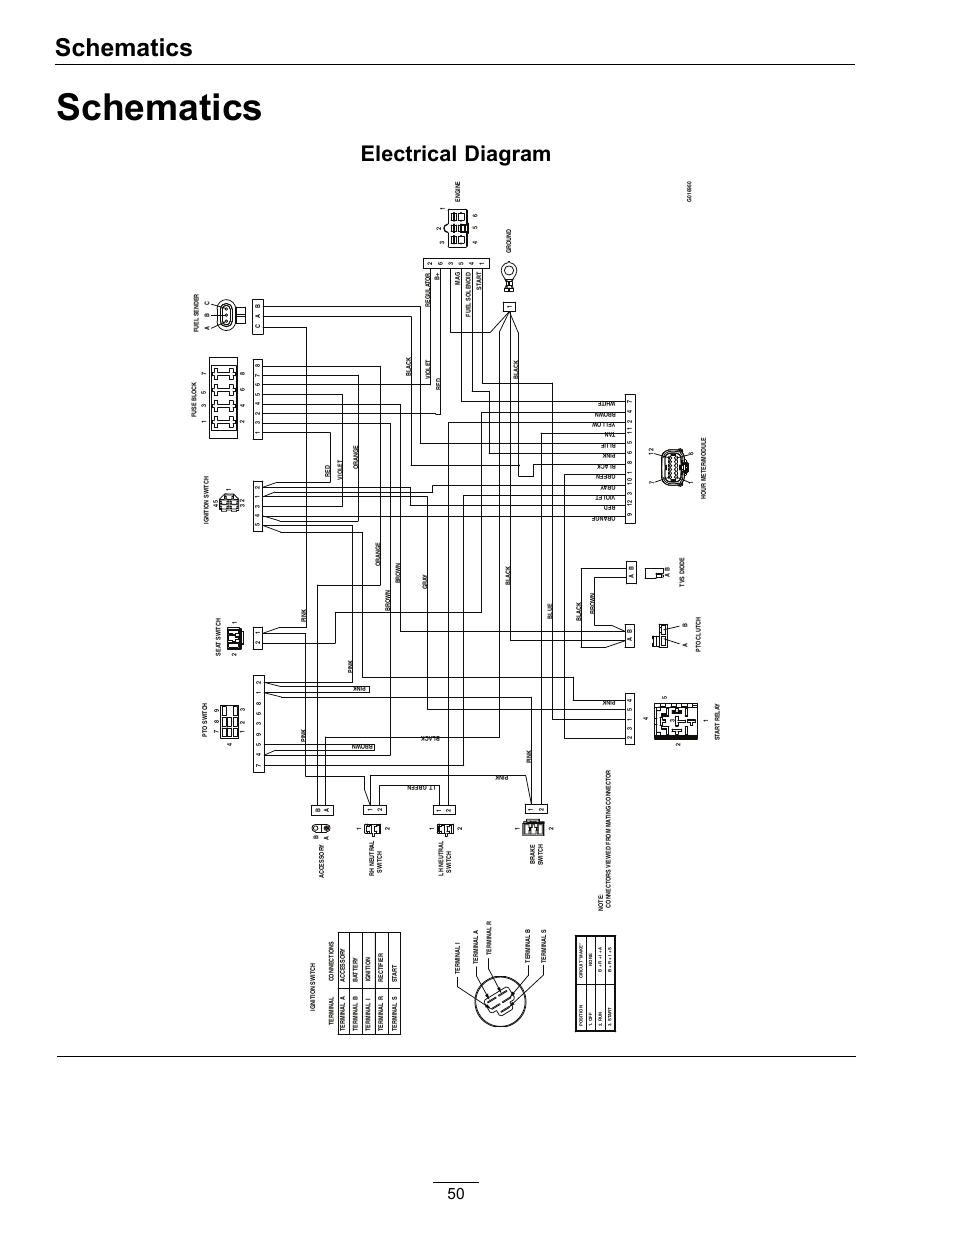 how is blue ox wiring diagram wired to chev equinox